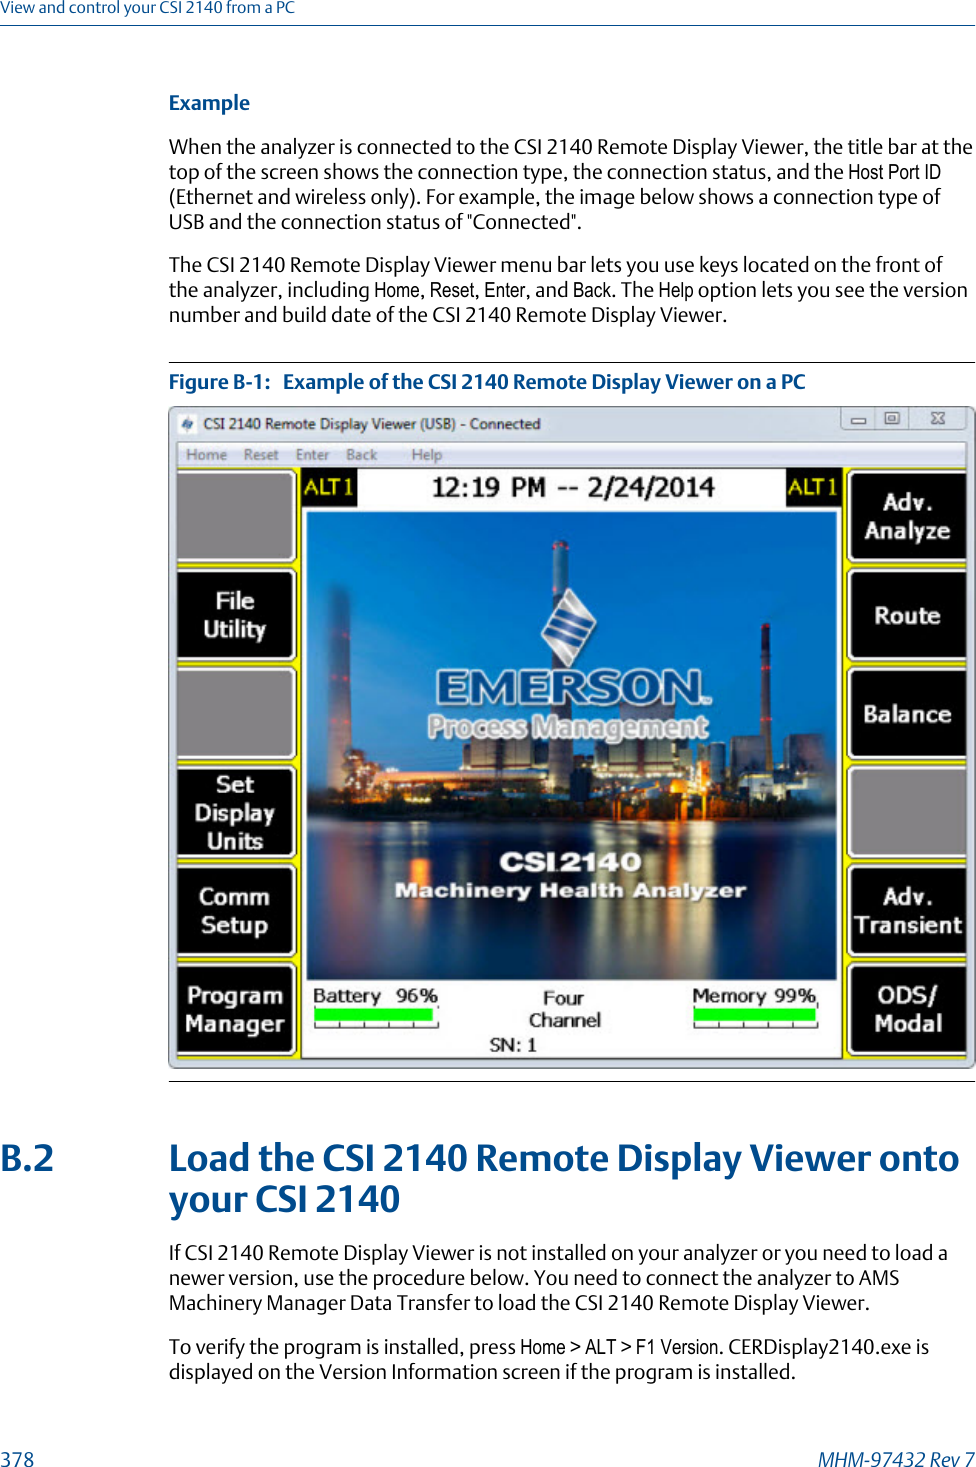 ExampleWhen the analyzer is connected to the CSI 2140 Remote Display Viewer, the title bar at thetop of the screen shows the connection type, the connection status, and the Host Port ID(Ethernet and wireless only). For example, the image below shows a connection type ofUSB and the connection status of &quot;Connected&quot;.The CSI 2140 Remote Display Viewer menu bar lets you use keys located on the front ofthe analyzer, including Home, Reset, Enter, and Back. The Help option lets you see the versionnumber and build date of the CSI 2140 Remote Display Viewer.Example of the CSI 2140 Remote Display Viewer on a PCFigure B-1:   B.2 Load the CSI 2140 Remote Display Viewer ontoyour CSI 2140If CSI 2140 Remote Display Viewer is not installed on your analyzer or you need to load anewer version, use the procedure below. You need to connect the analyzer to AMSMachinery Manager Data Transfer to load the CSI 2140 Remote Display Viewer.To verify the program is installed, press Home &gt; ALT &gt; F1 Version. CERDisplay2140.exe isdisplayed on the Version Information screen if the program is installed.View and control your CSI 2140 from a PC378 MHM-97432 Rev 7